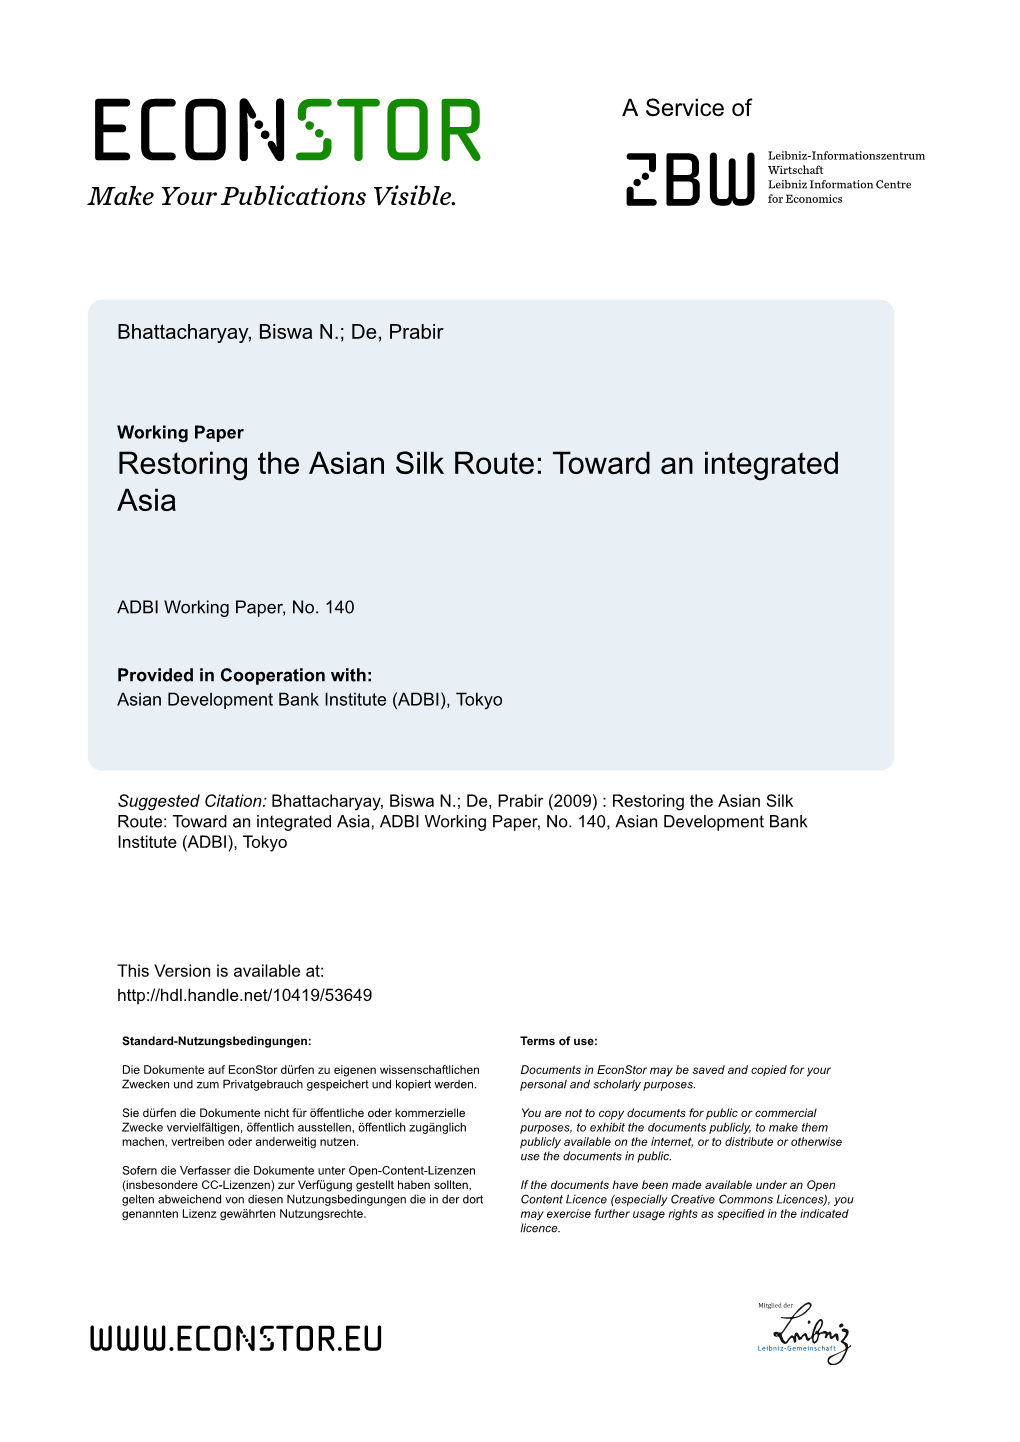 Restoring the Asian Silk Route: Toward an Integrated Asia